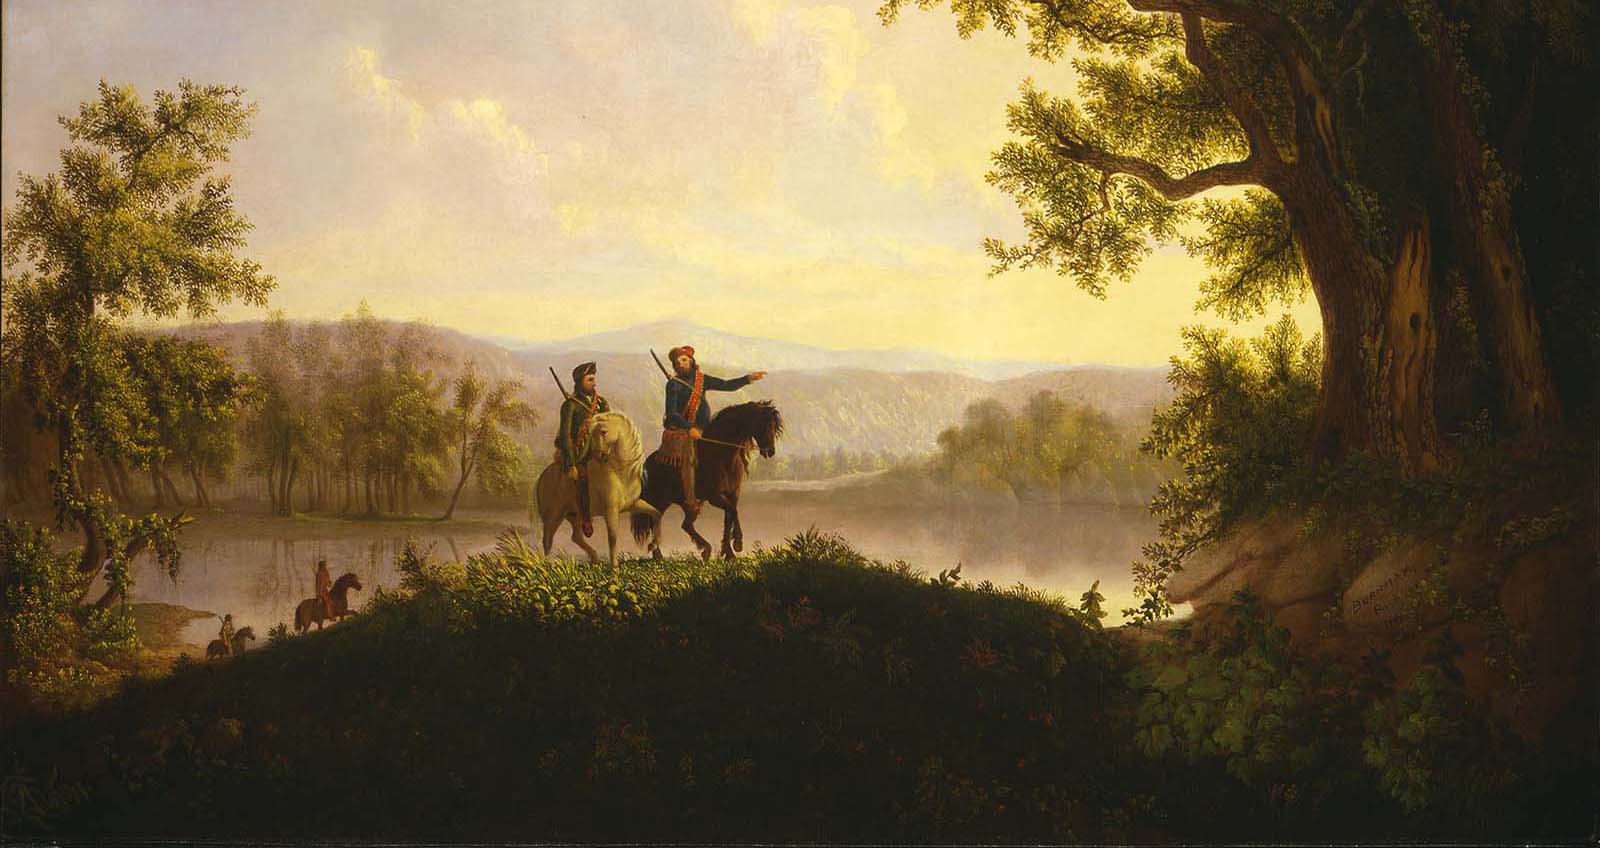 Thomas Mickell Burnham (1818–1866) characterized the group. "The Lewis and Clark Expedition," ca. 1850. Oil on canvas, 36.125 x 48.5 inches. Museum Purchase. 21.78